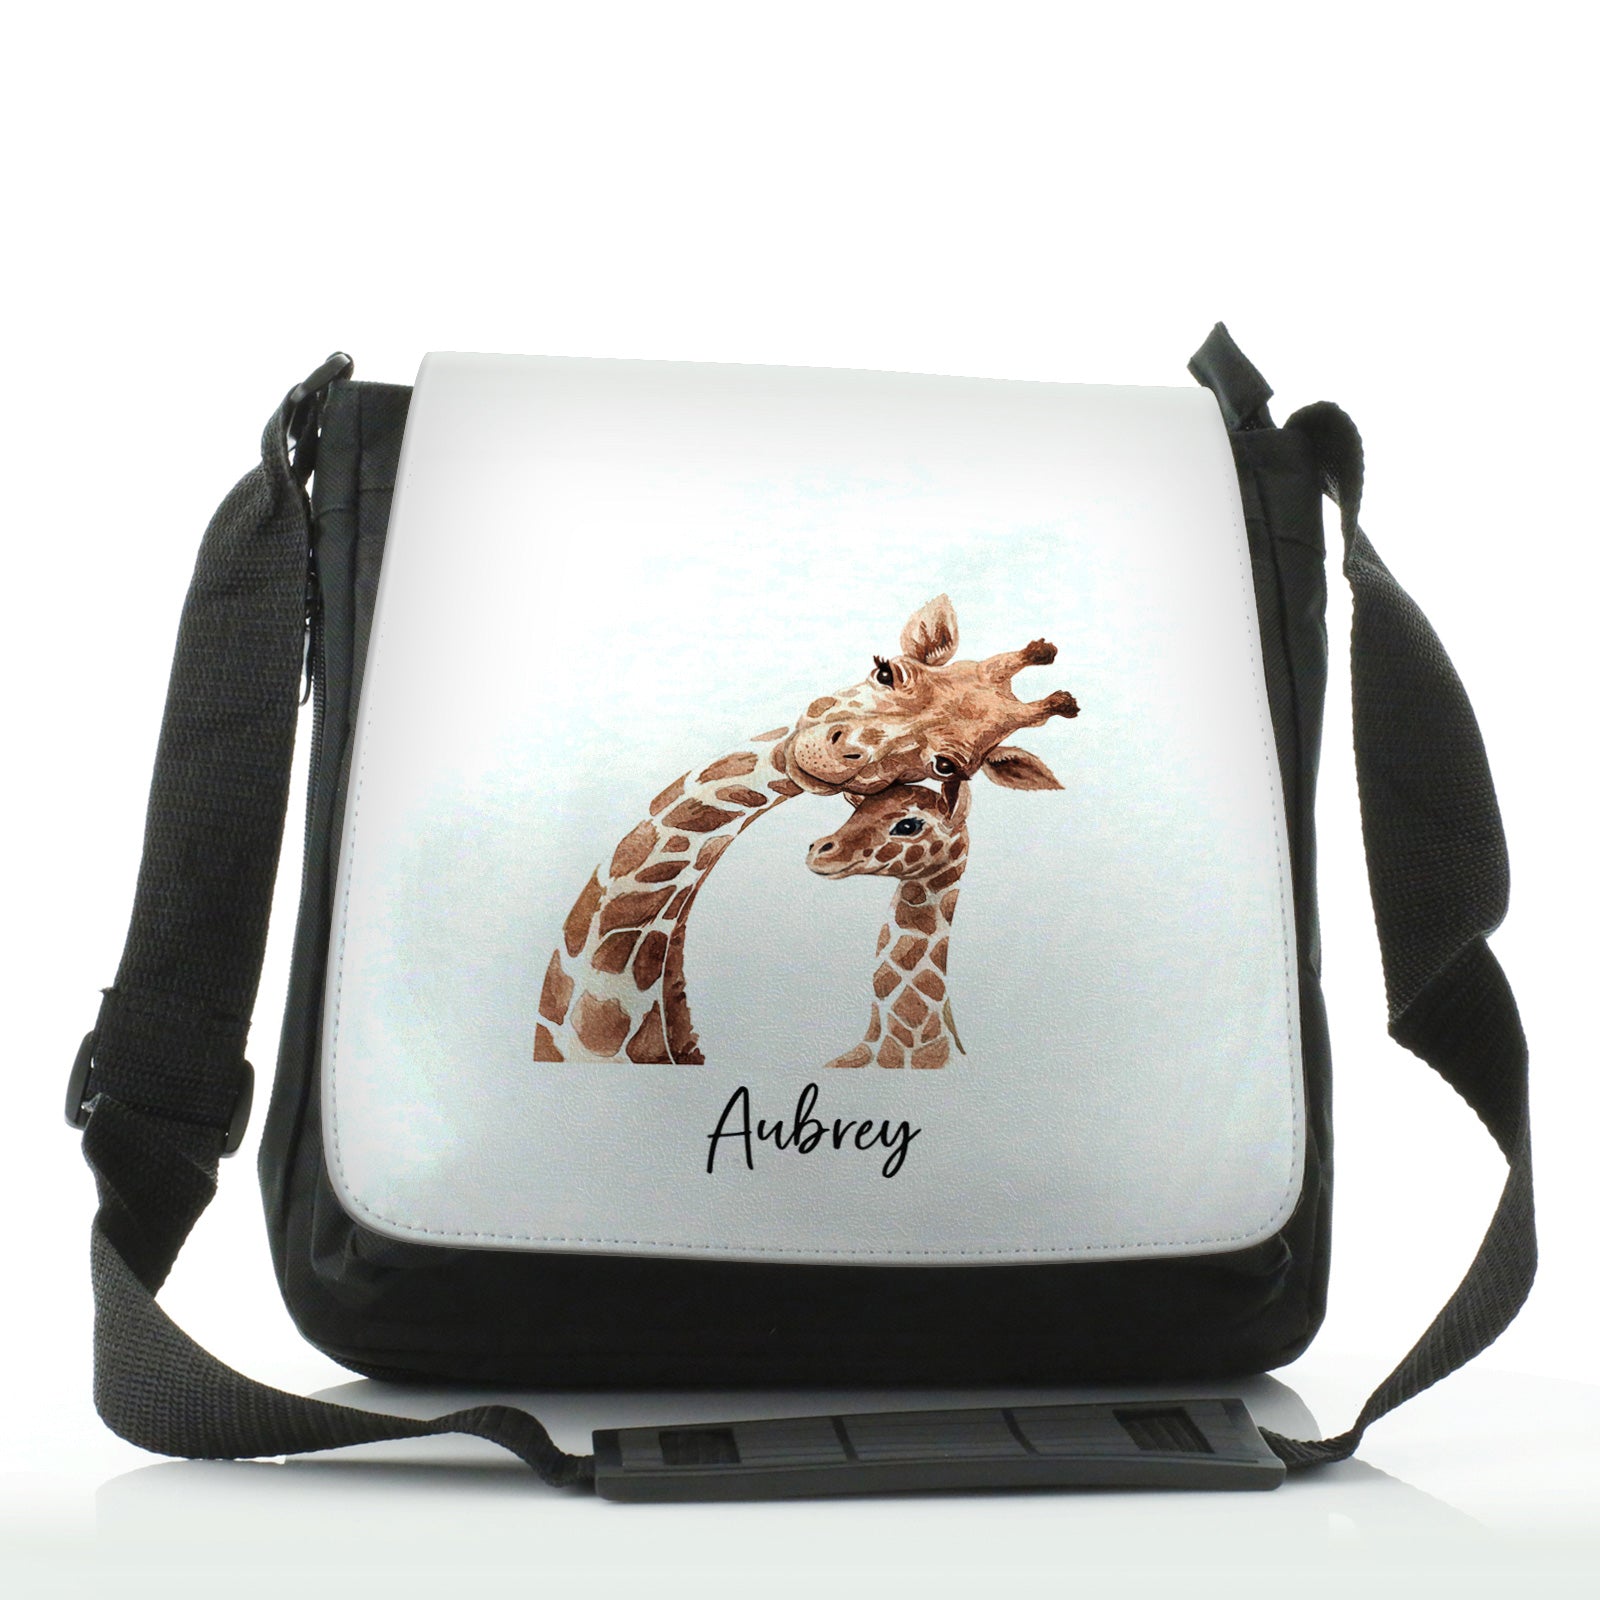 Personalised Shoulder Bag with Welcoming Text and Relaxing Mum and Baby Giraffes